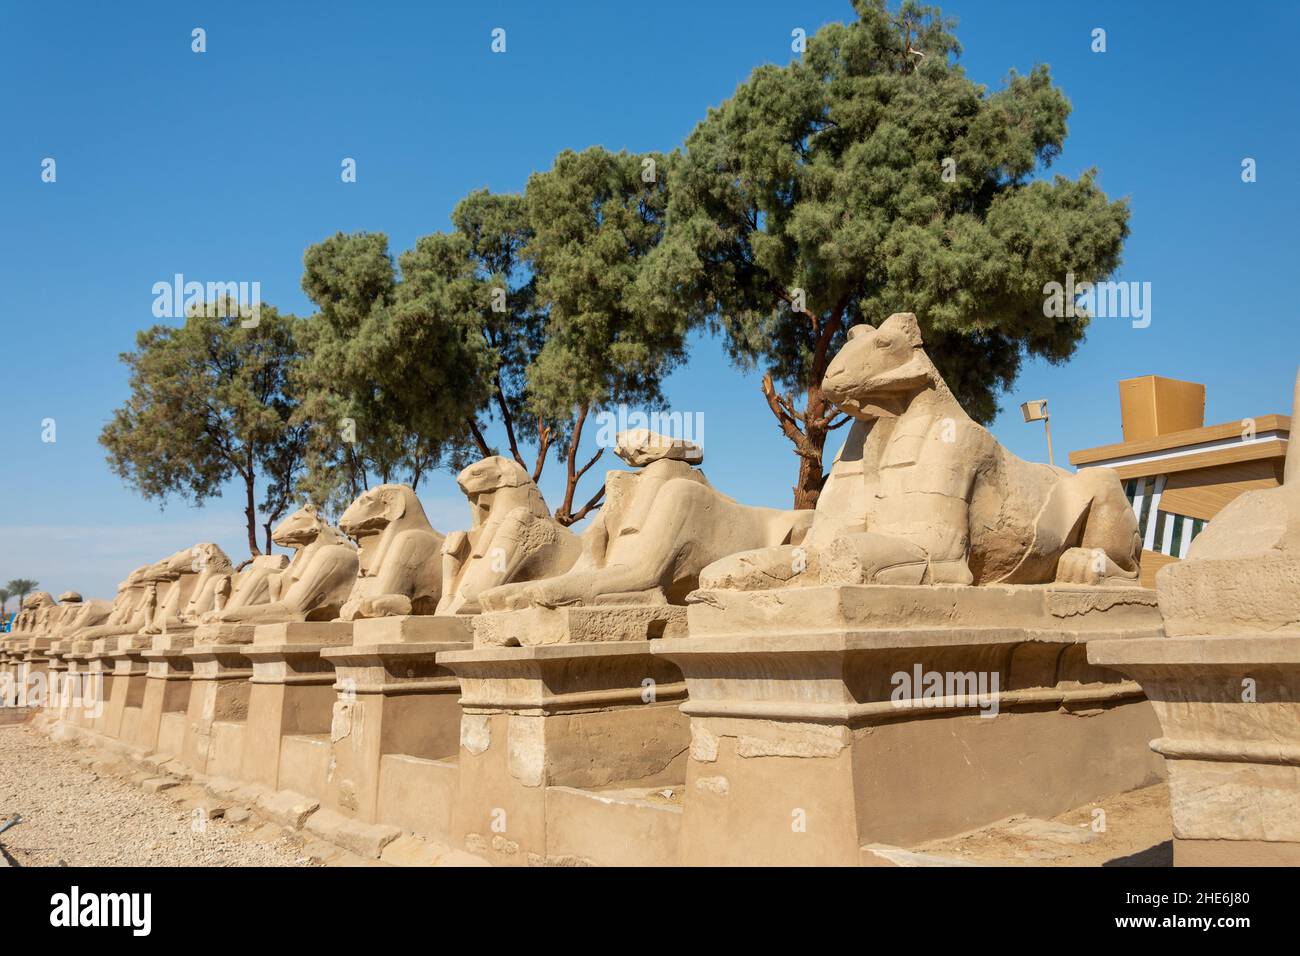 A raw of sphinxes in the Karnak temple complex in Luxor, Egypt. Stock Photo